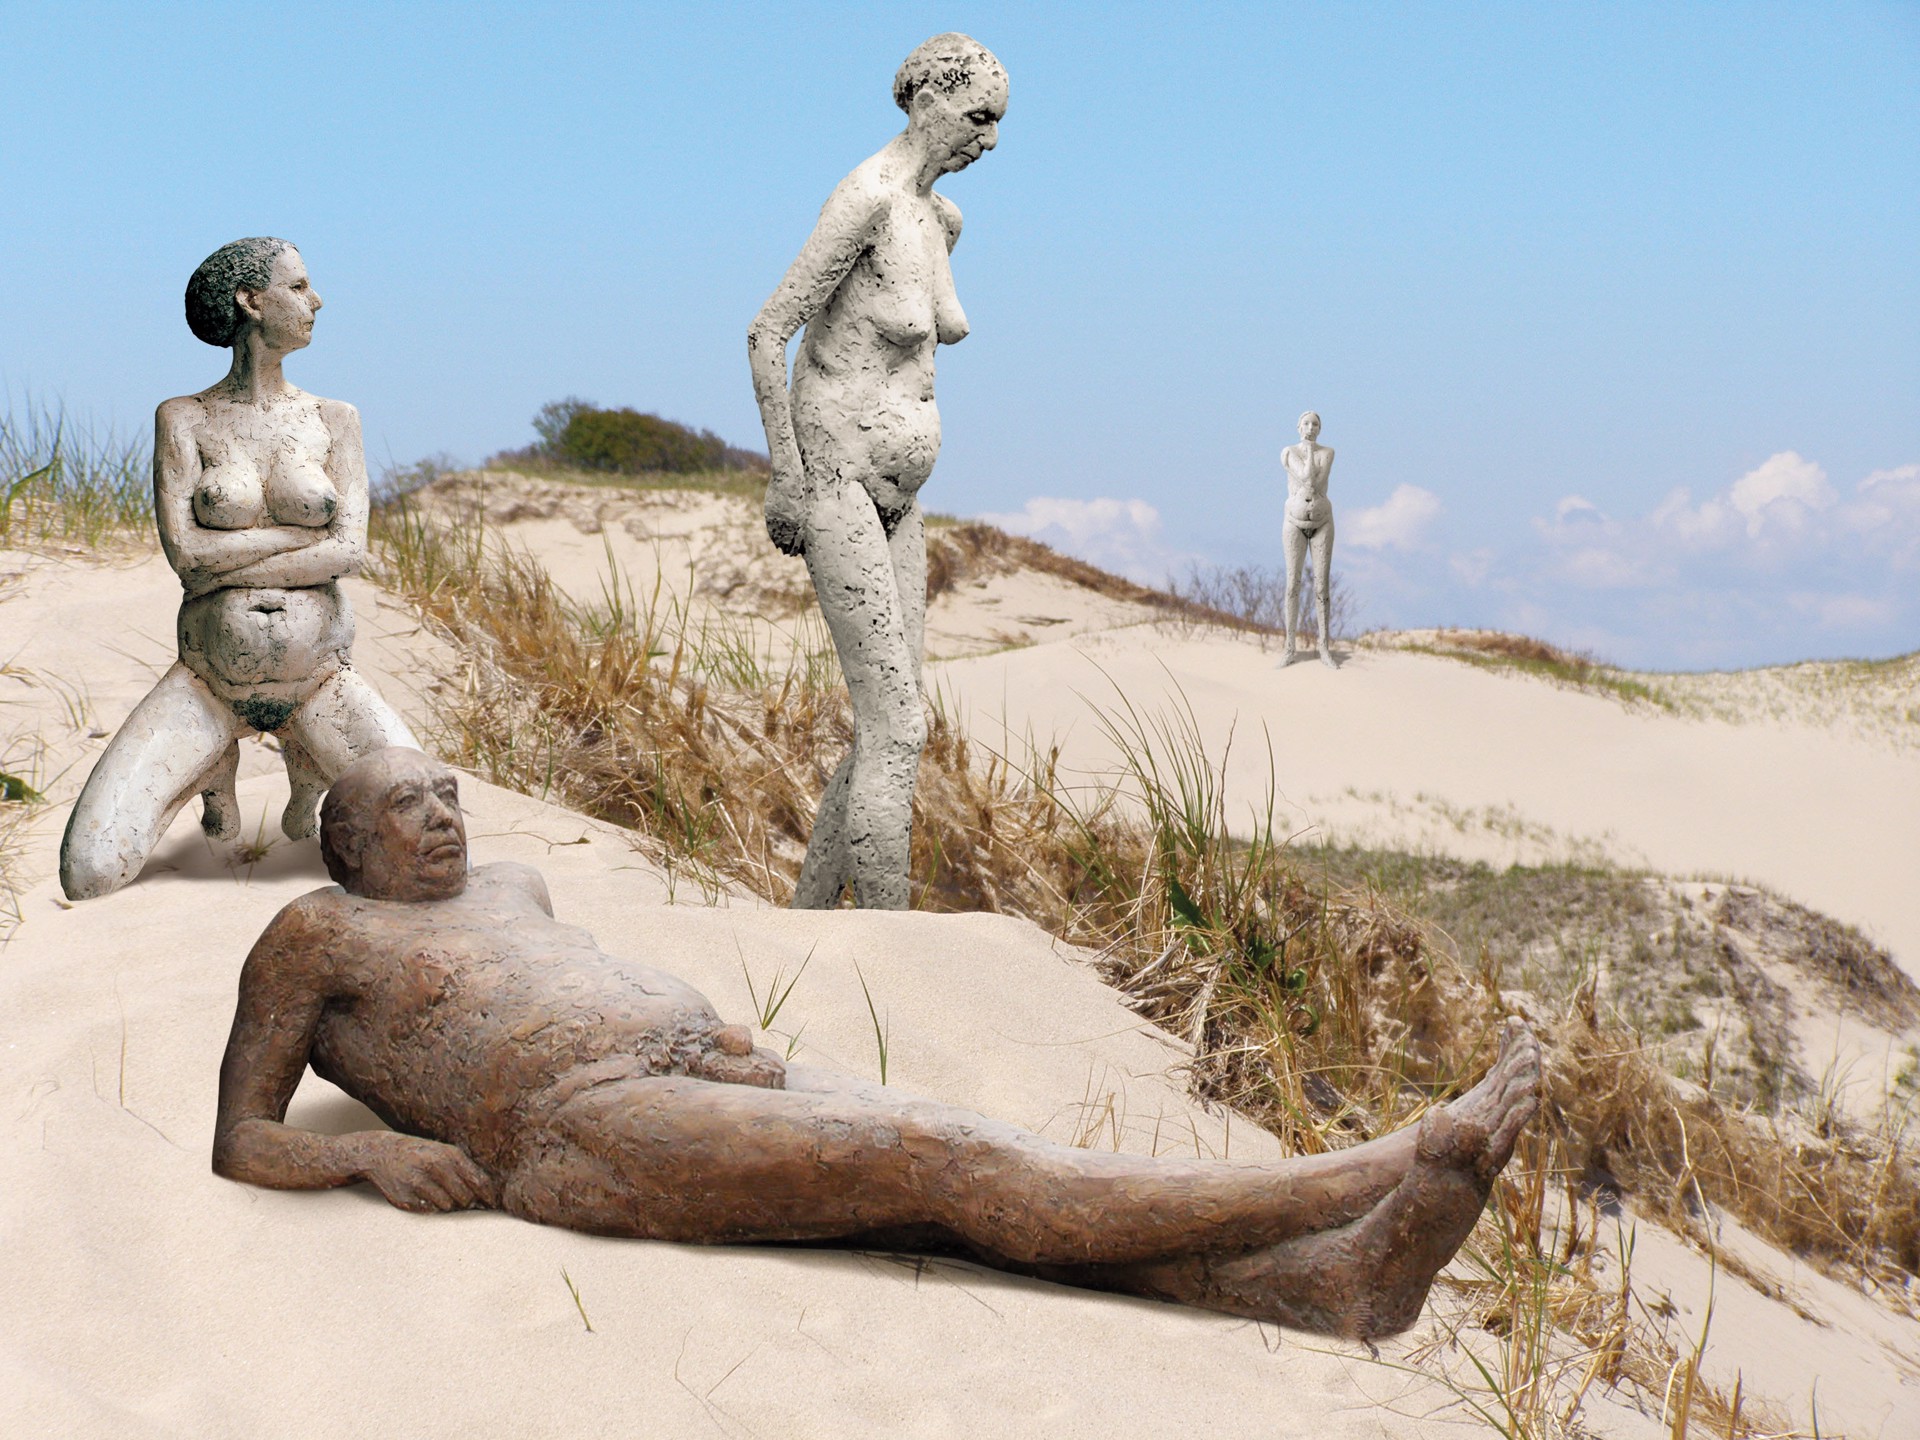 Four in the Dunes by Penelope Jencks